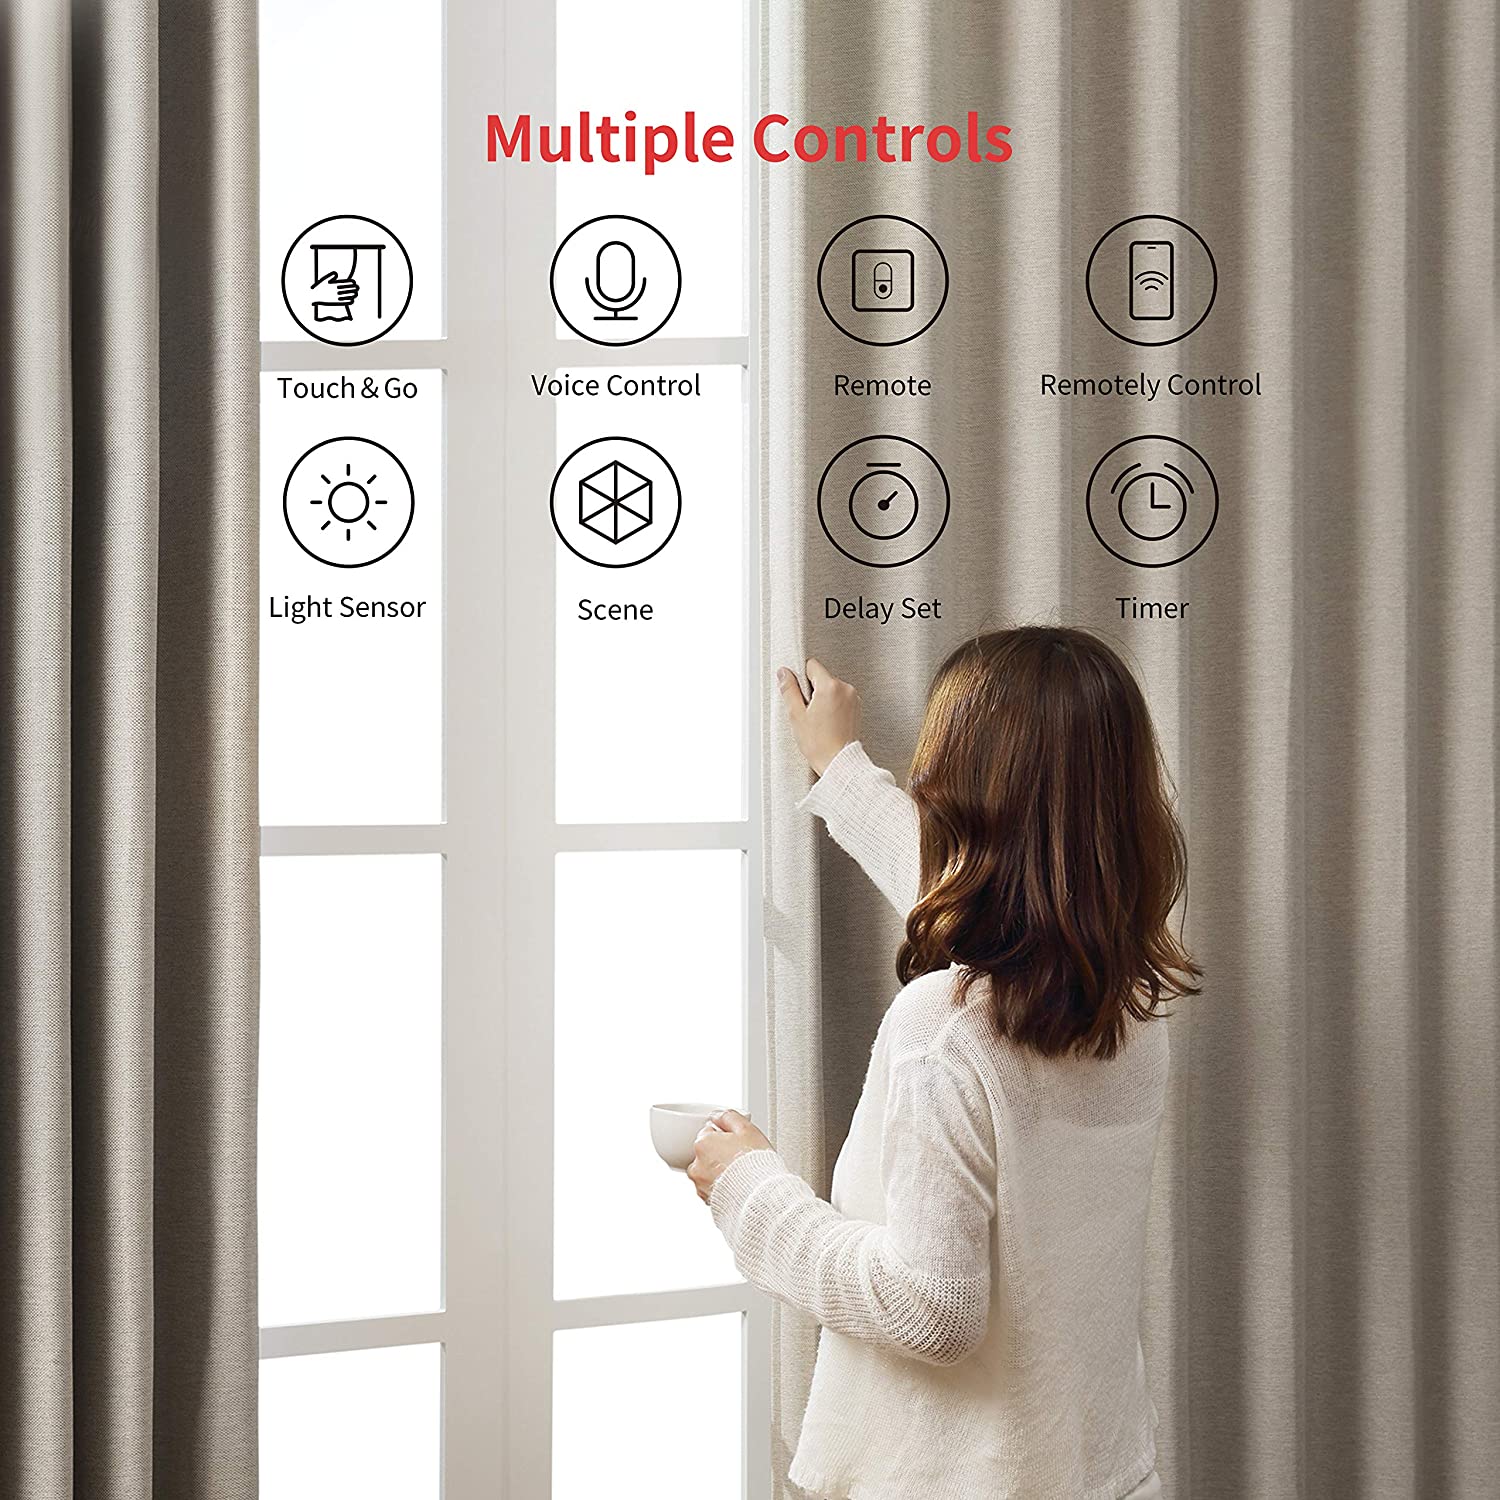 SwitchBot Curtain (I Rail) | Smart Curtain Controller - Add SwitchBot Hub Mini to Make it Compatible with Alexa, Google Home, IFTTT